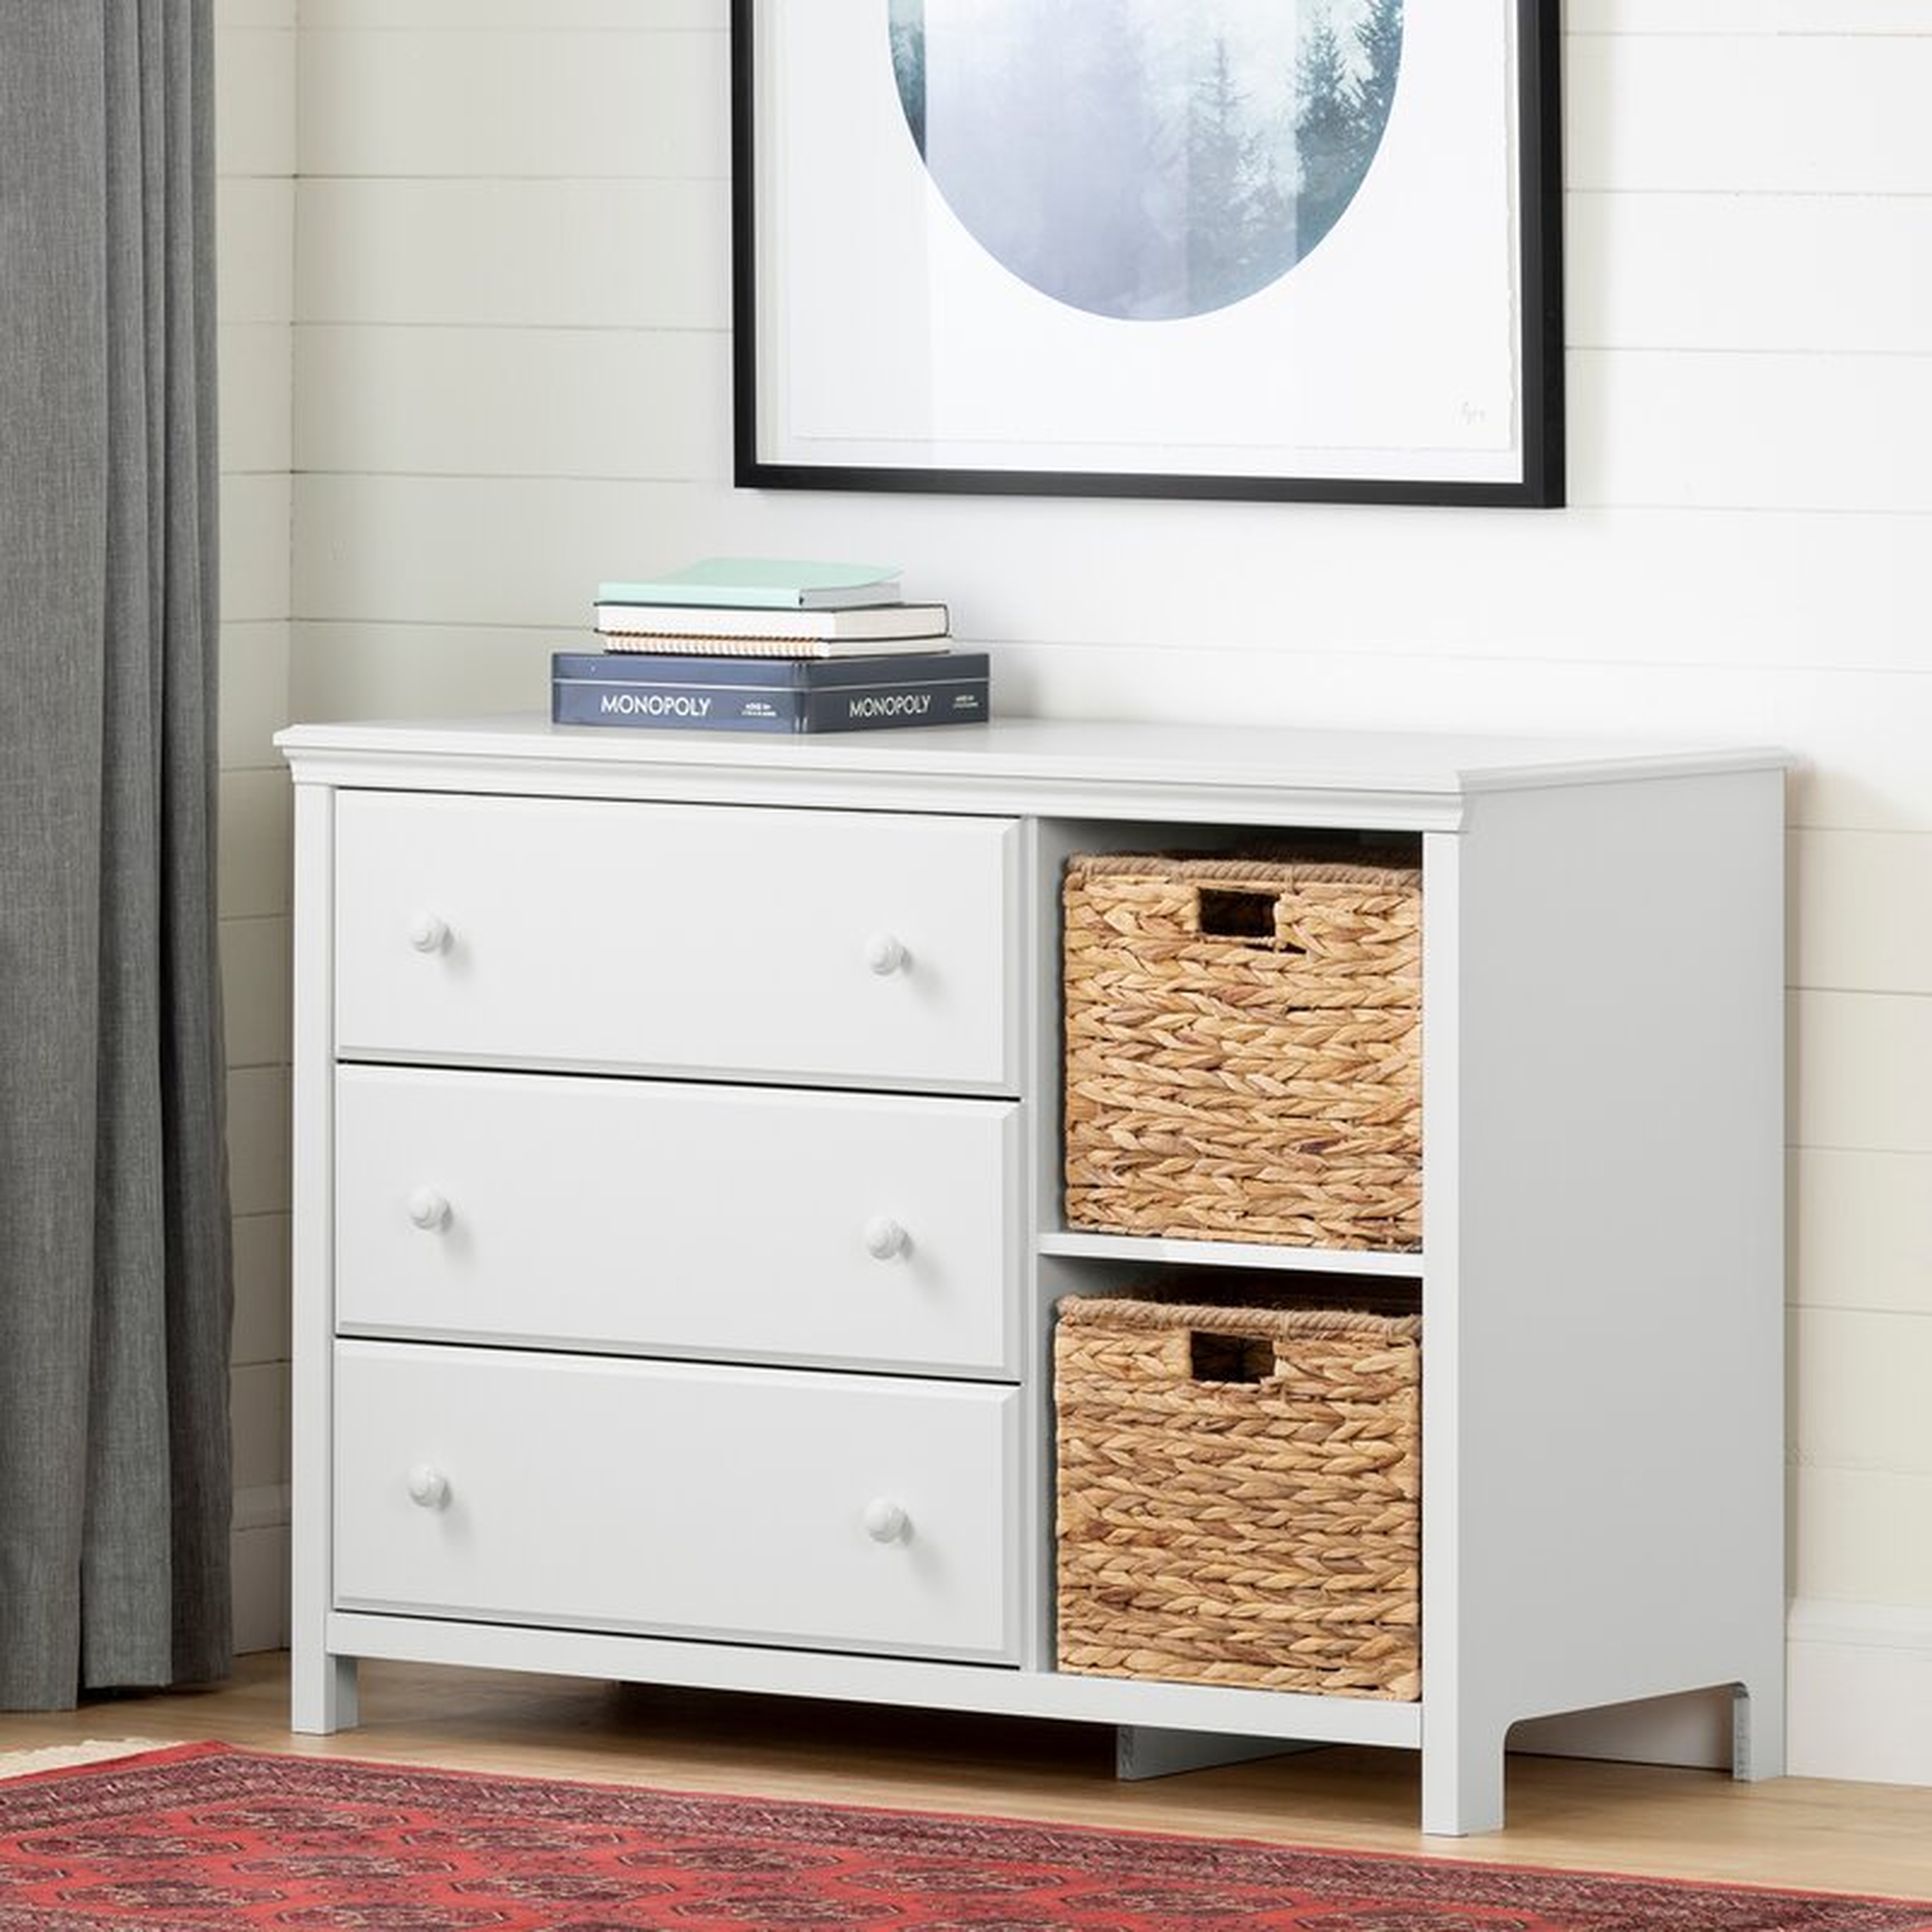 White Cotton Candy 3 Drawer Dresser with Cubbies - Wayfair